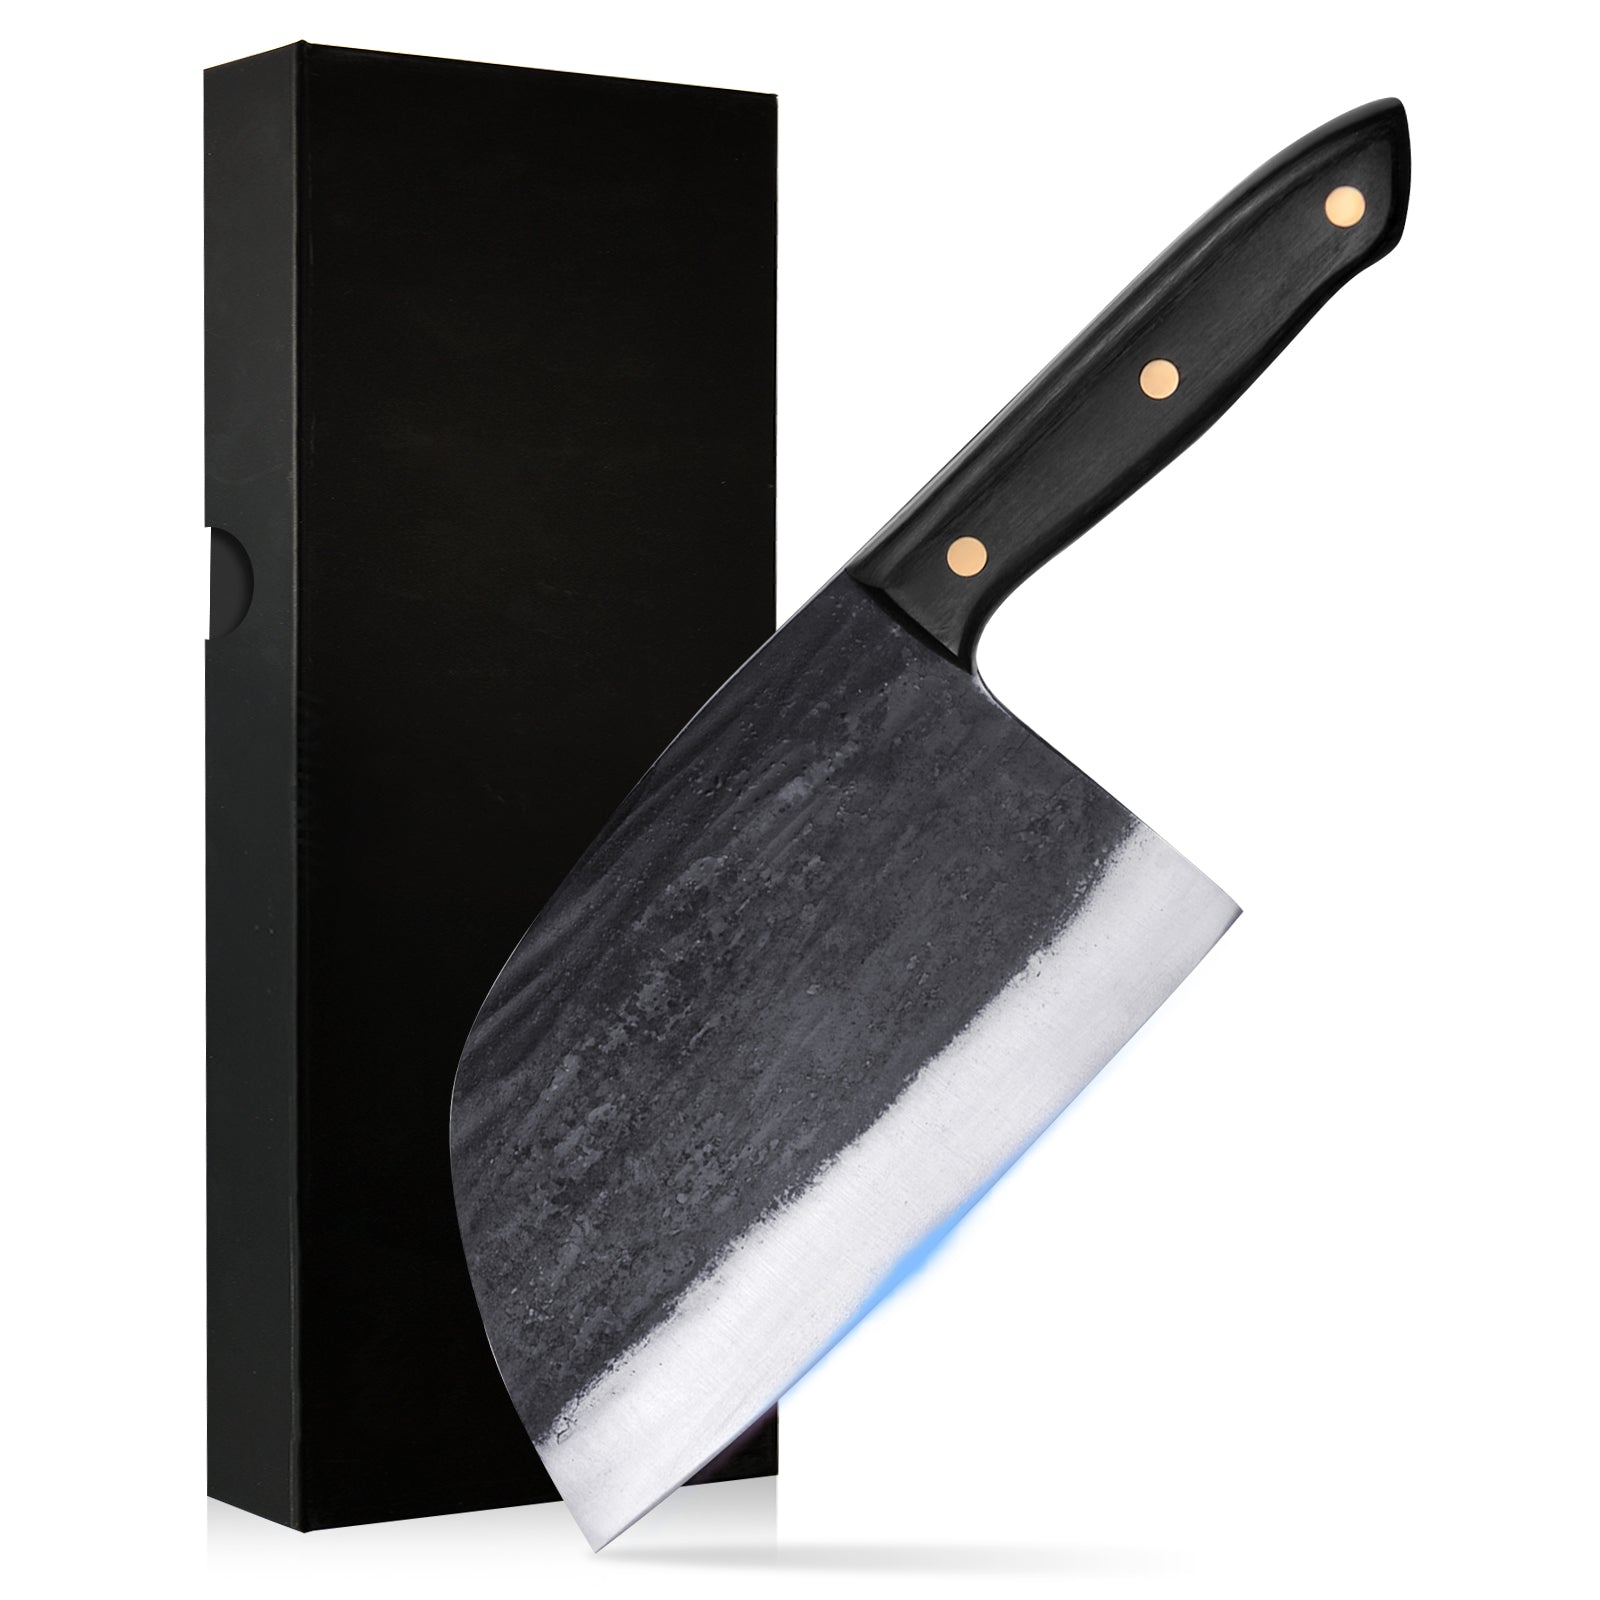 Qulajoy Serbian Chef Knife 6.7 Inch - High Carbon Steel Meat Cleaver - Professional Japanese Full Tang Hammered Cutting Knife For Kitchen Camping BBQ Outdoor - Barbecue Whizz...Watch My Smoke!